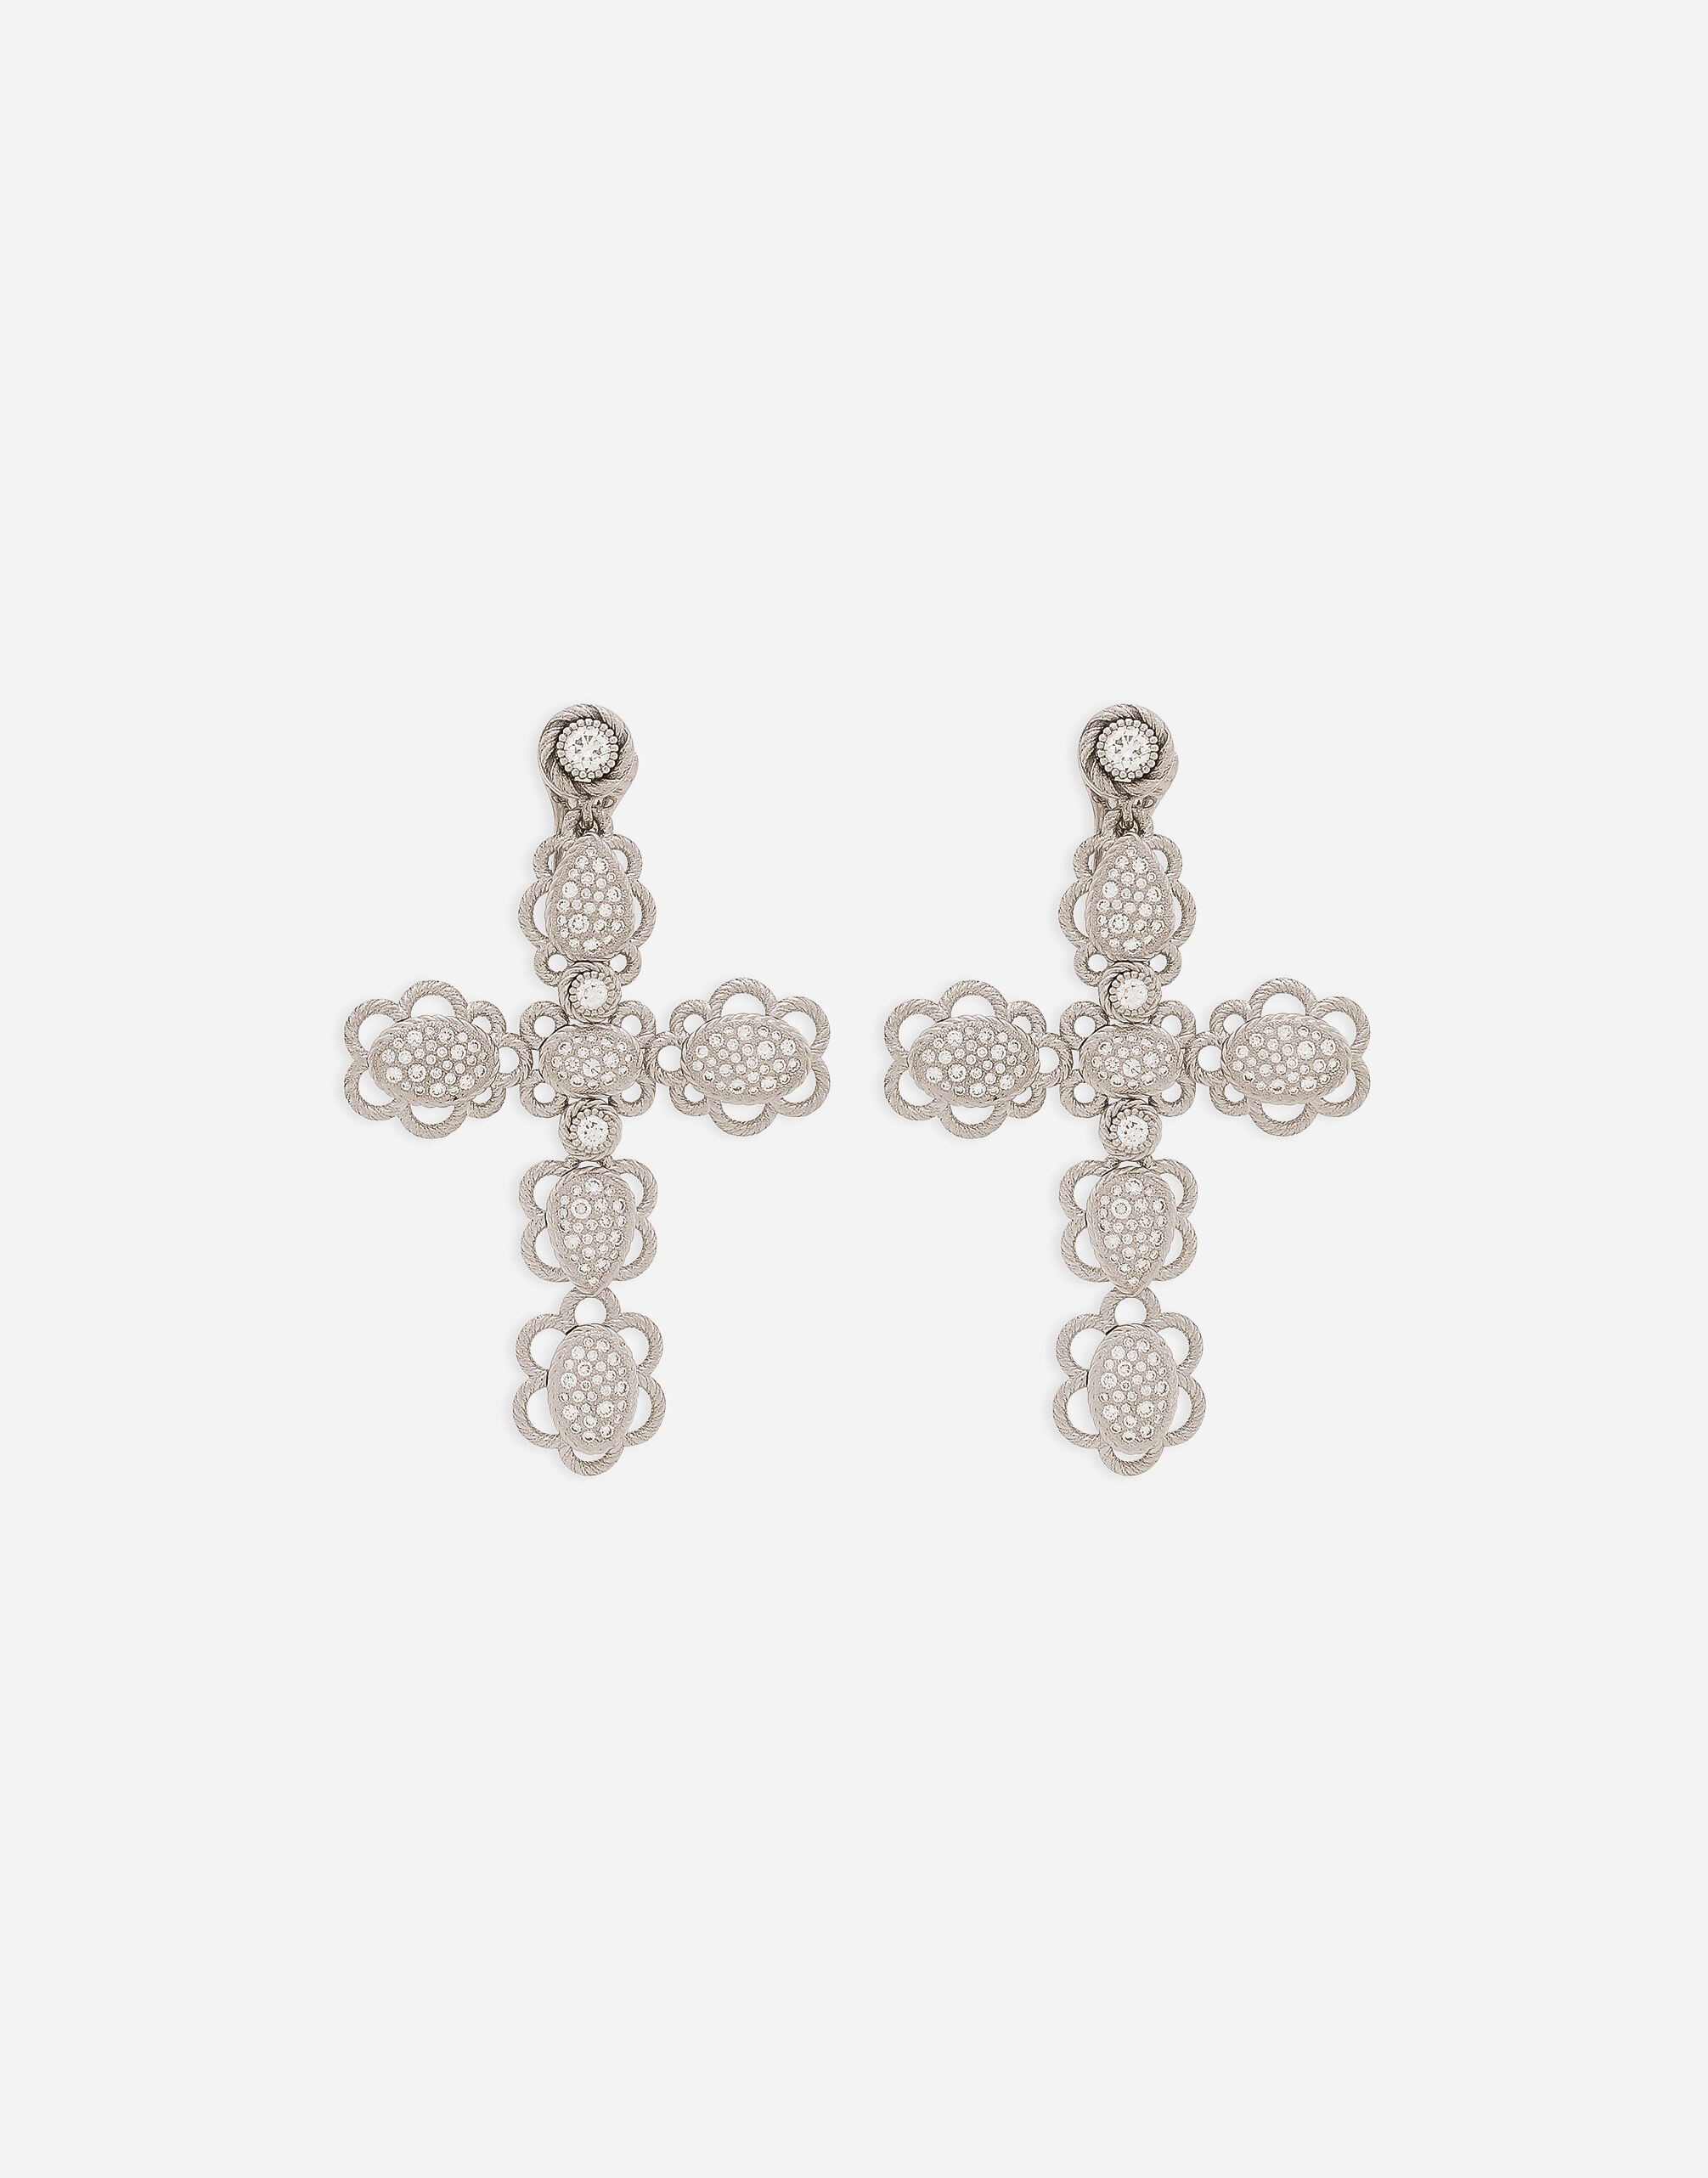 Dolce & Gabbana Easy Diamond earrings in white gold 18kt and diamonds pavé Weiss WEQD4GWPAVE